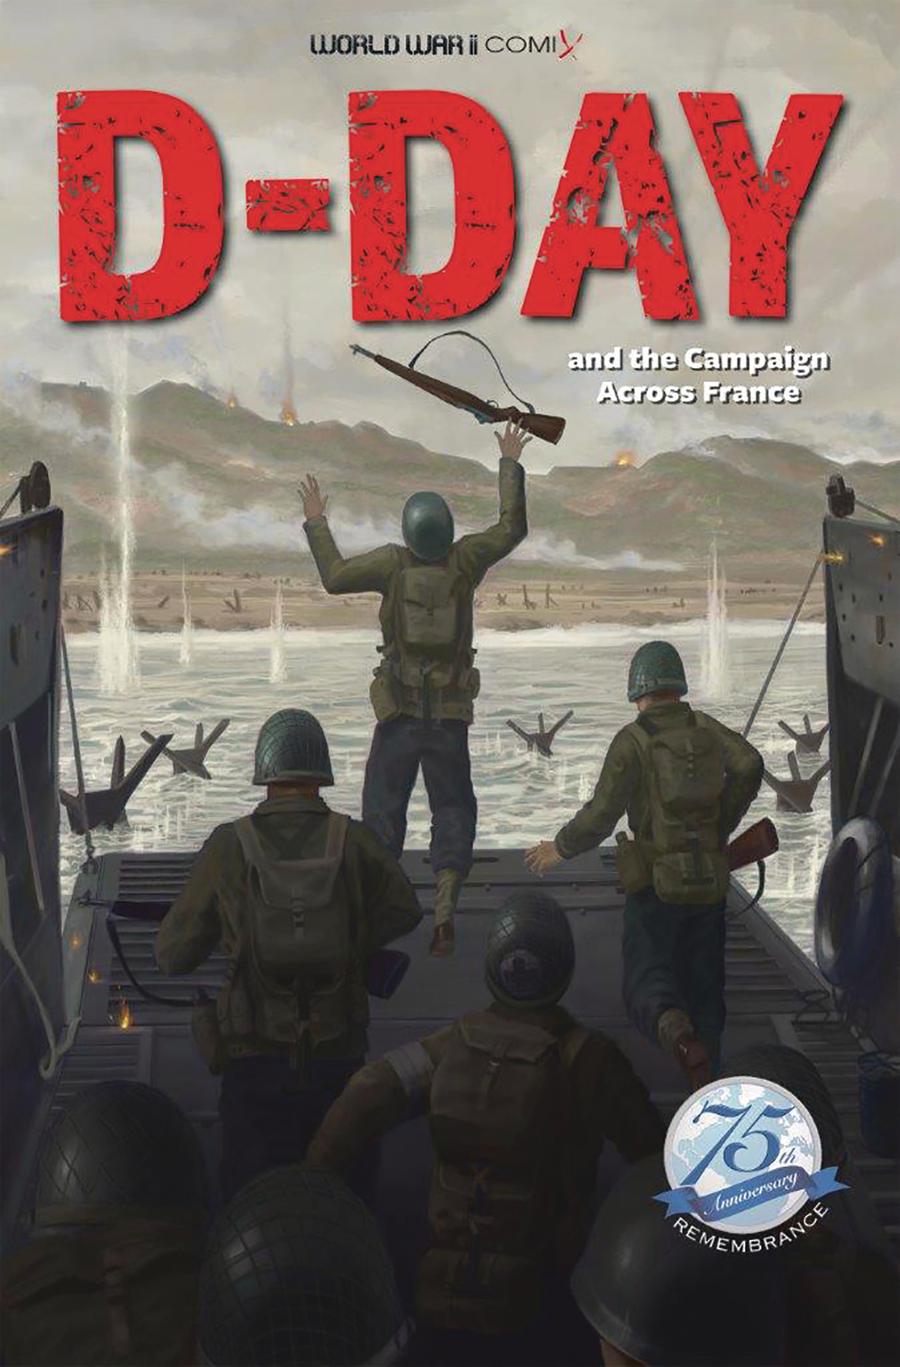 World War II Comix D-Day And The Campaign Across France